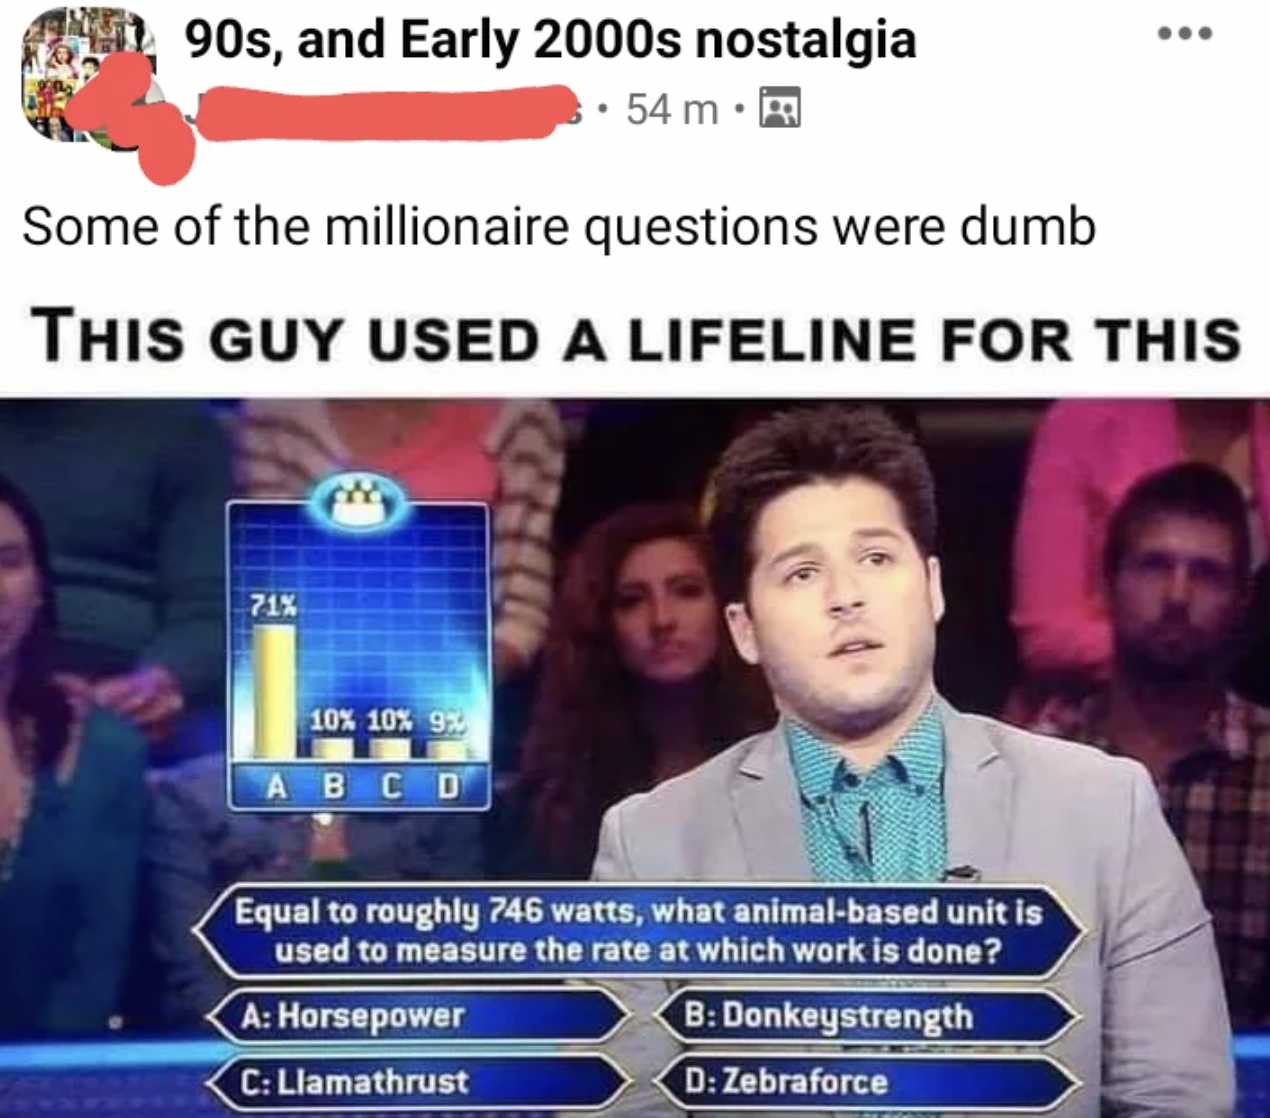 llamathrust meme - 90s, and Early 2000s nostalgia 54 m. ... Some of the millionaire questions were dumb This Guy Used A Lifeline For This 71% 10% 10% 9% Abcd Equal to roughly 746 watts, what animalbased unit is used to measure the rate at which work is do